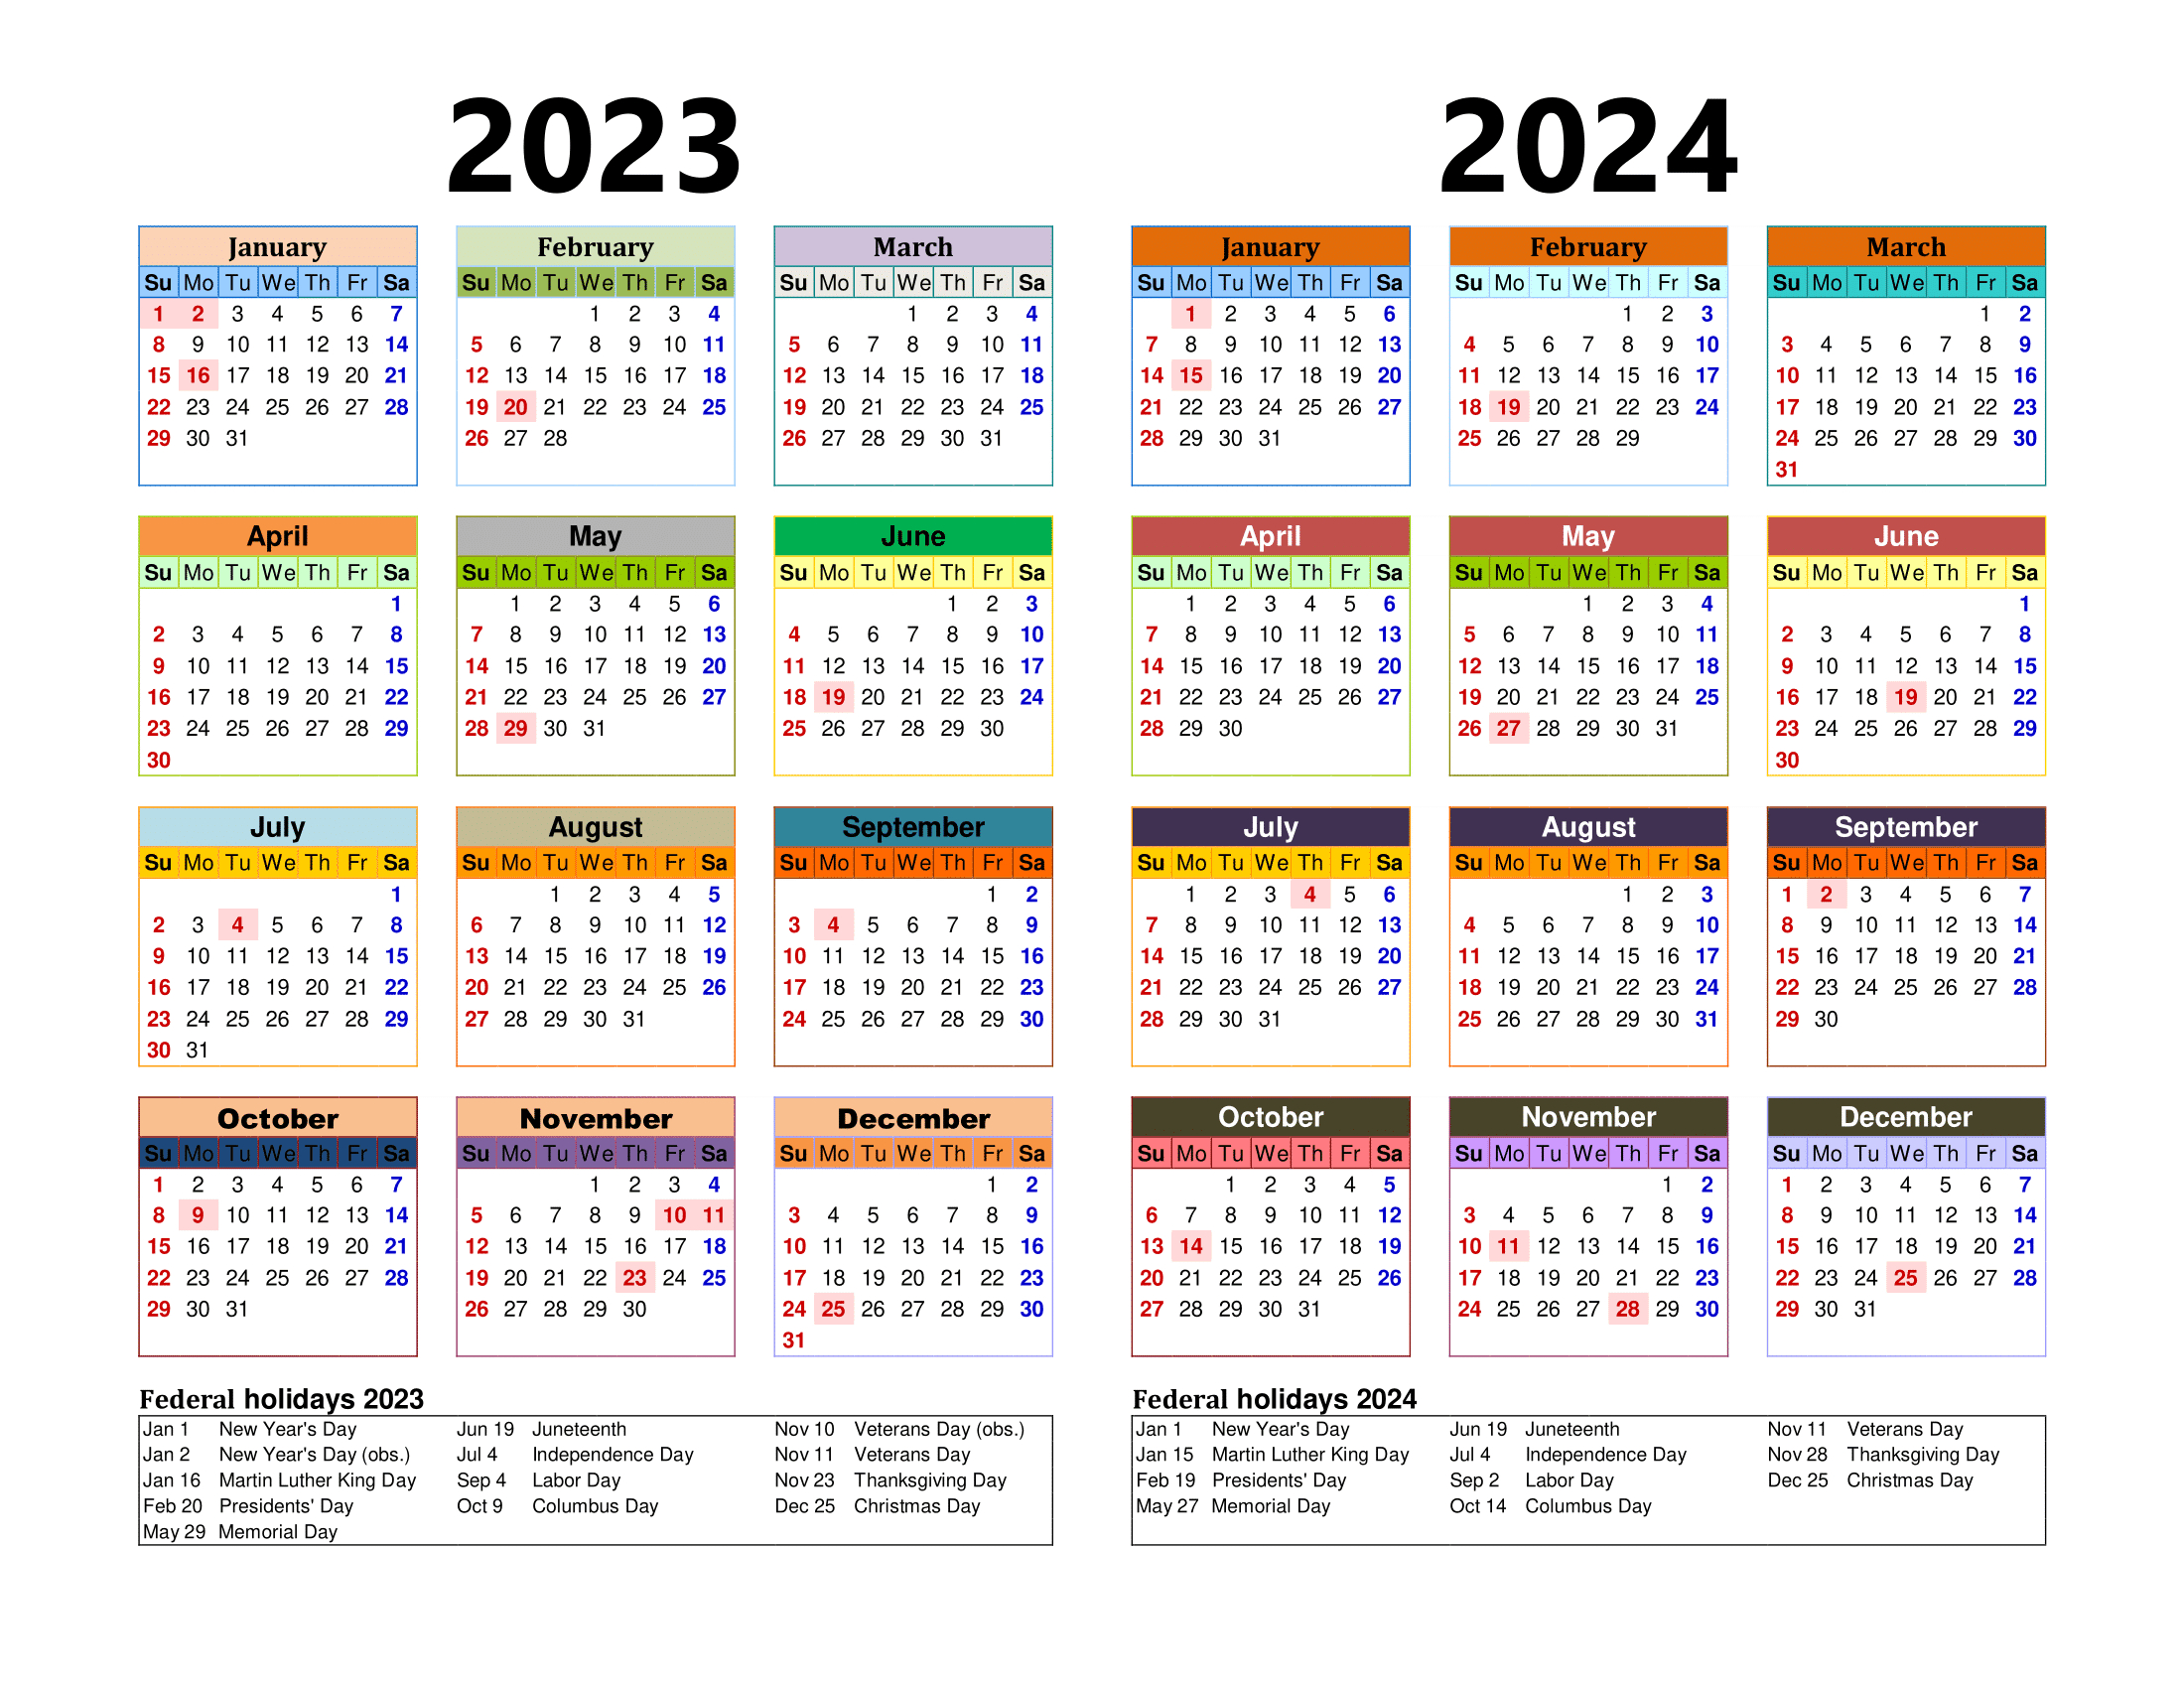 Free Printable Two Year Calendar Templates For 2023 And 2024 In Pdf | 2023 And 2024 Calendar Printable